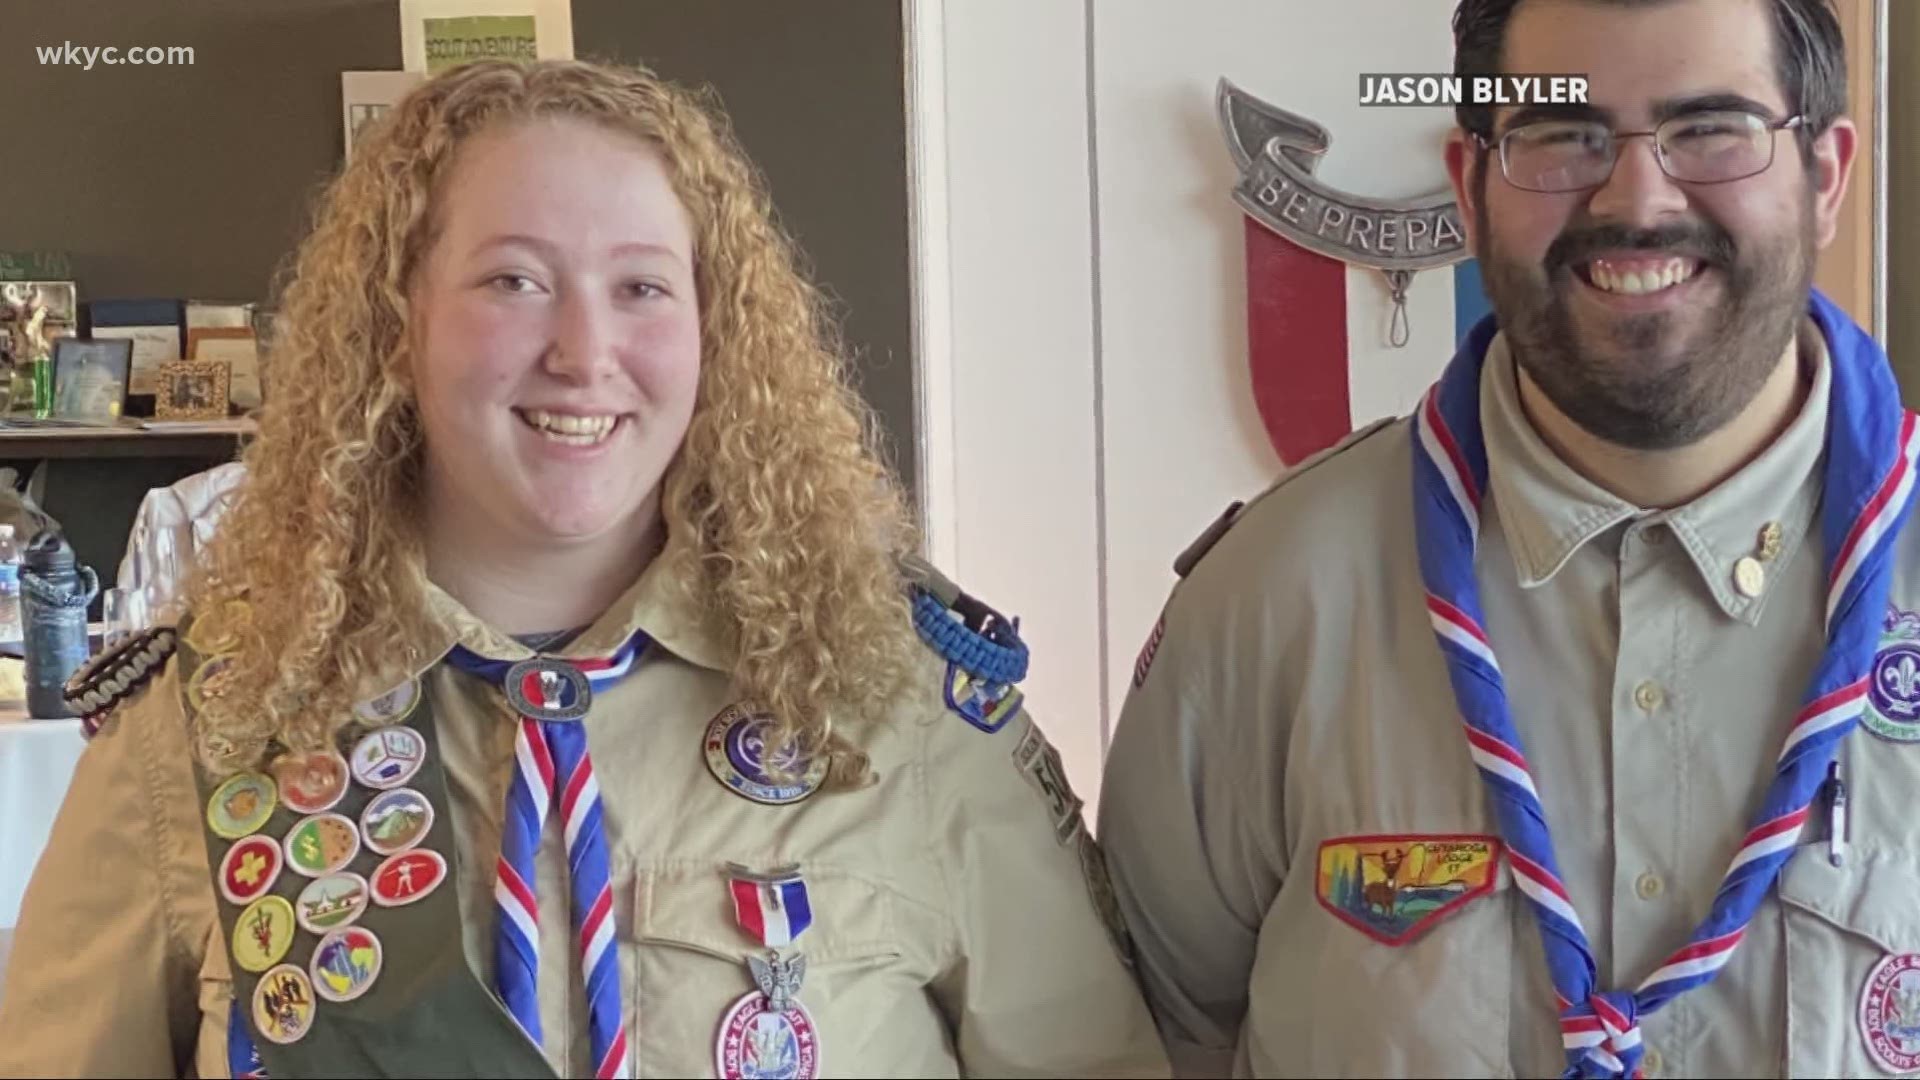 More than 1,000 young women are flying right through the glass ceiling to become Eagle Scouts. On Saturday, 18-year-old Kristen Blyler of Twinsburg joined them.